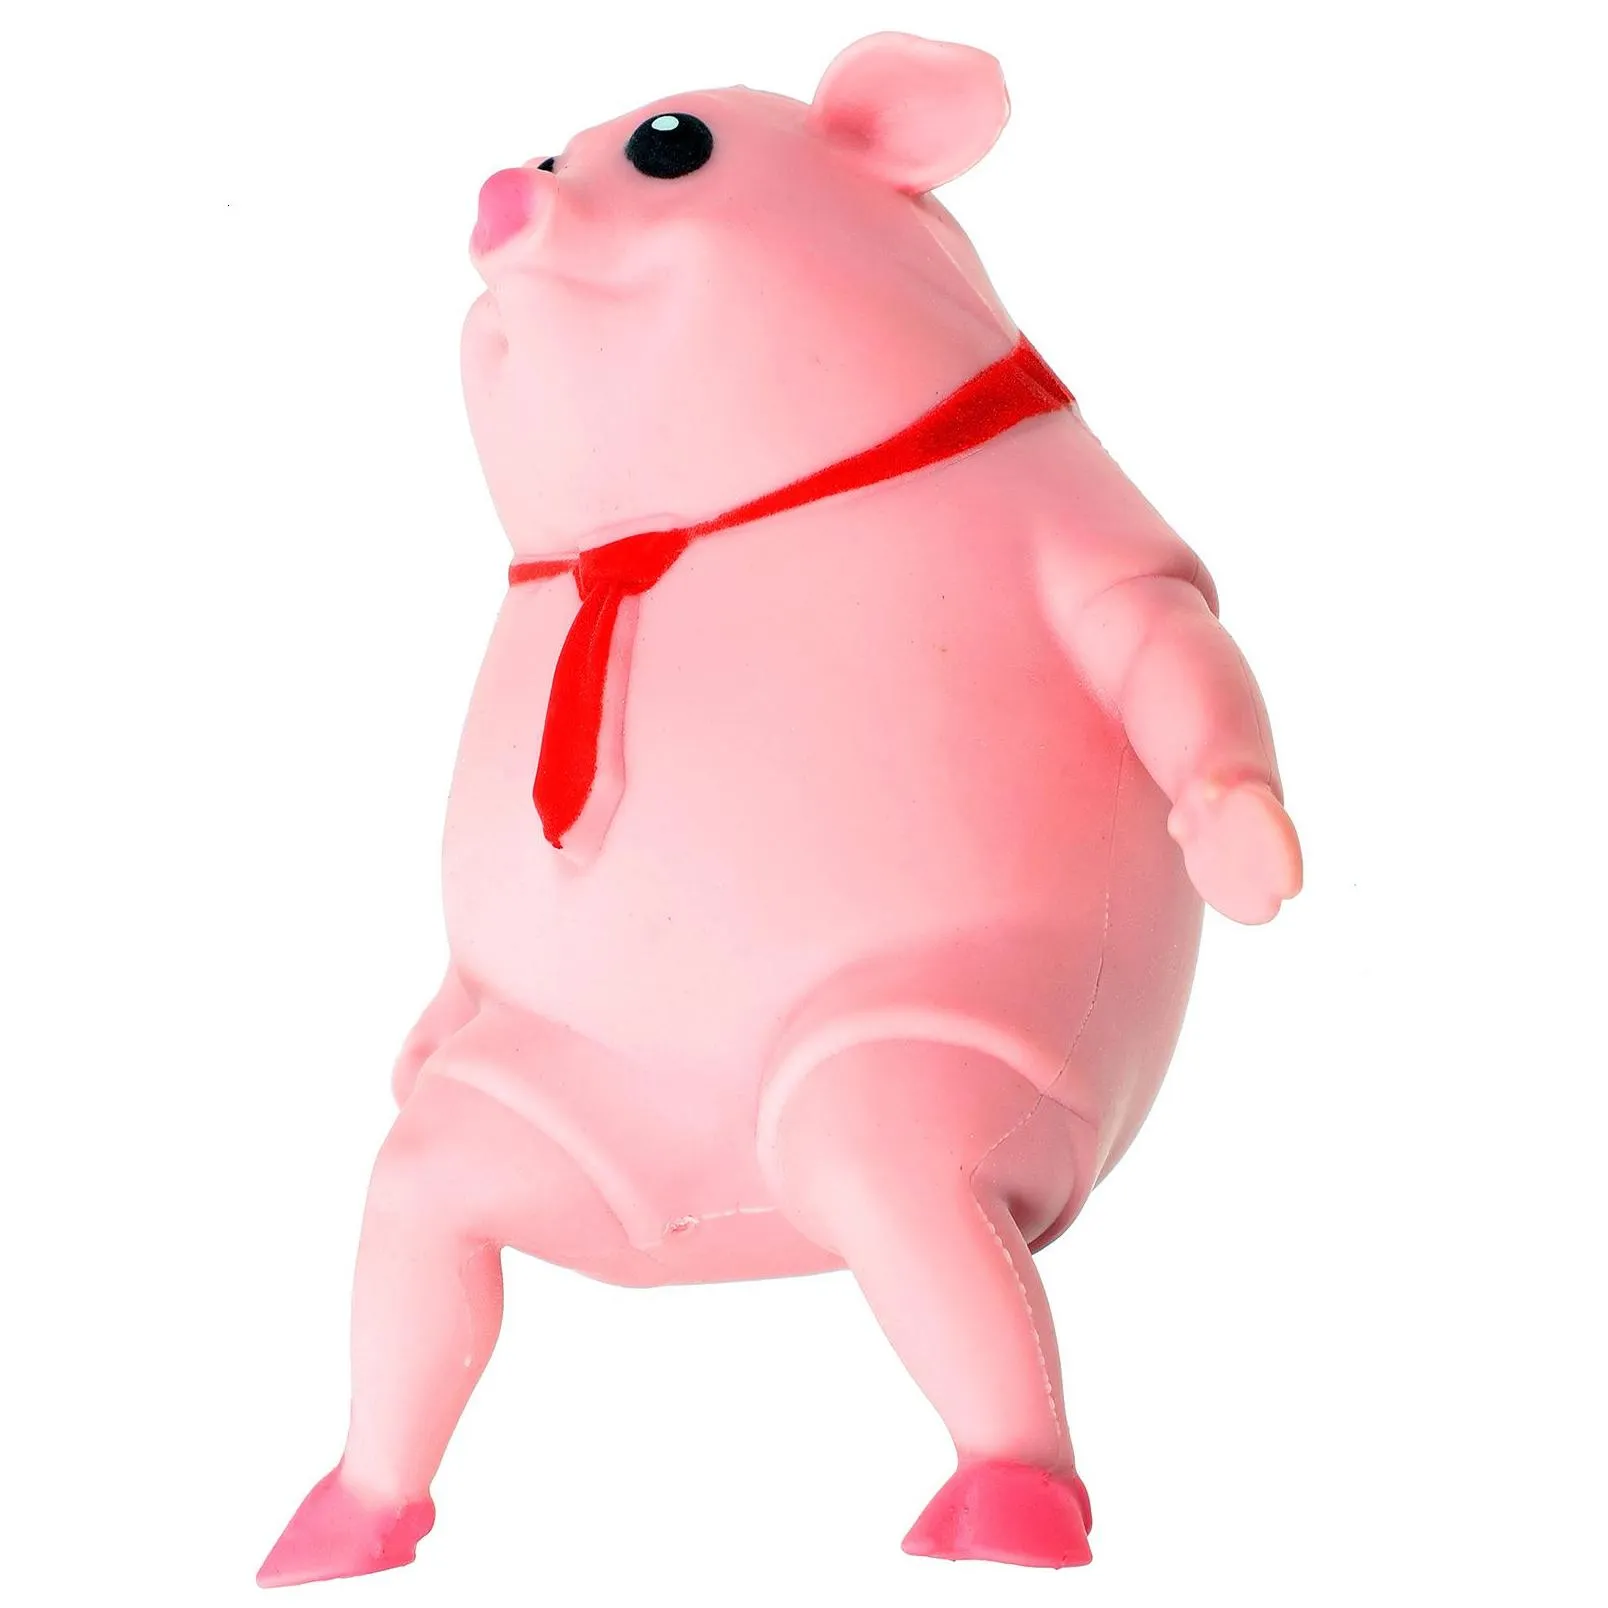 decompression toy squeeze pink pigs antistress cute animals lovely piggy doll stress relief children gifts 230612